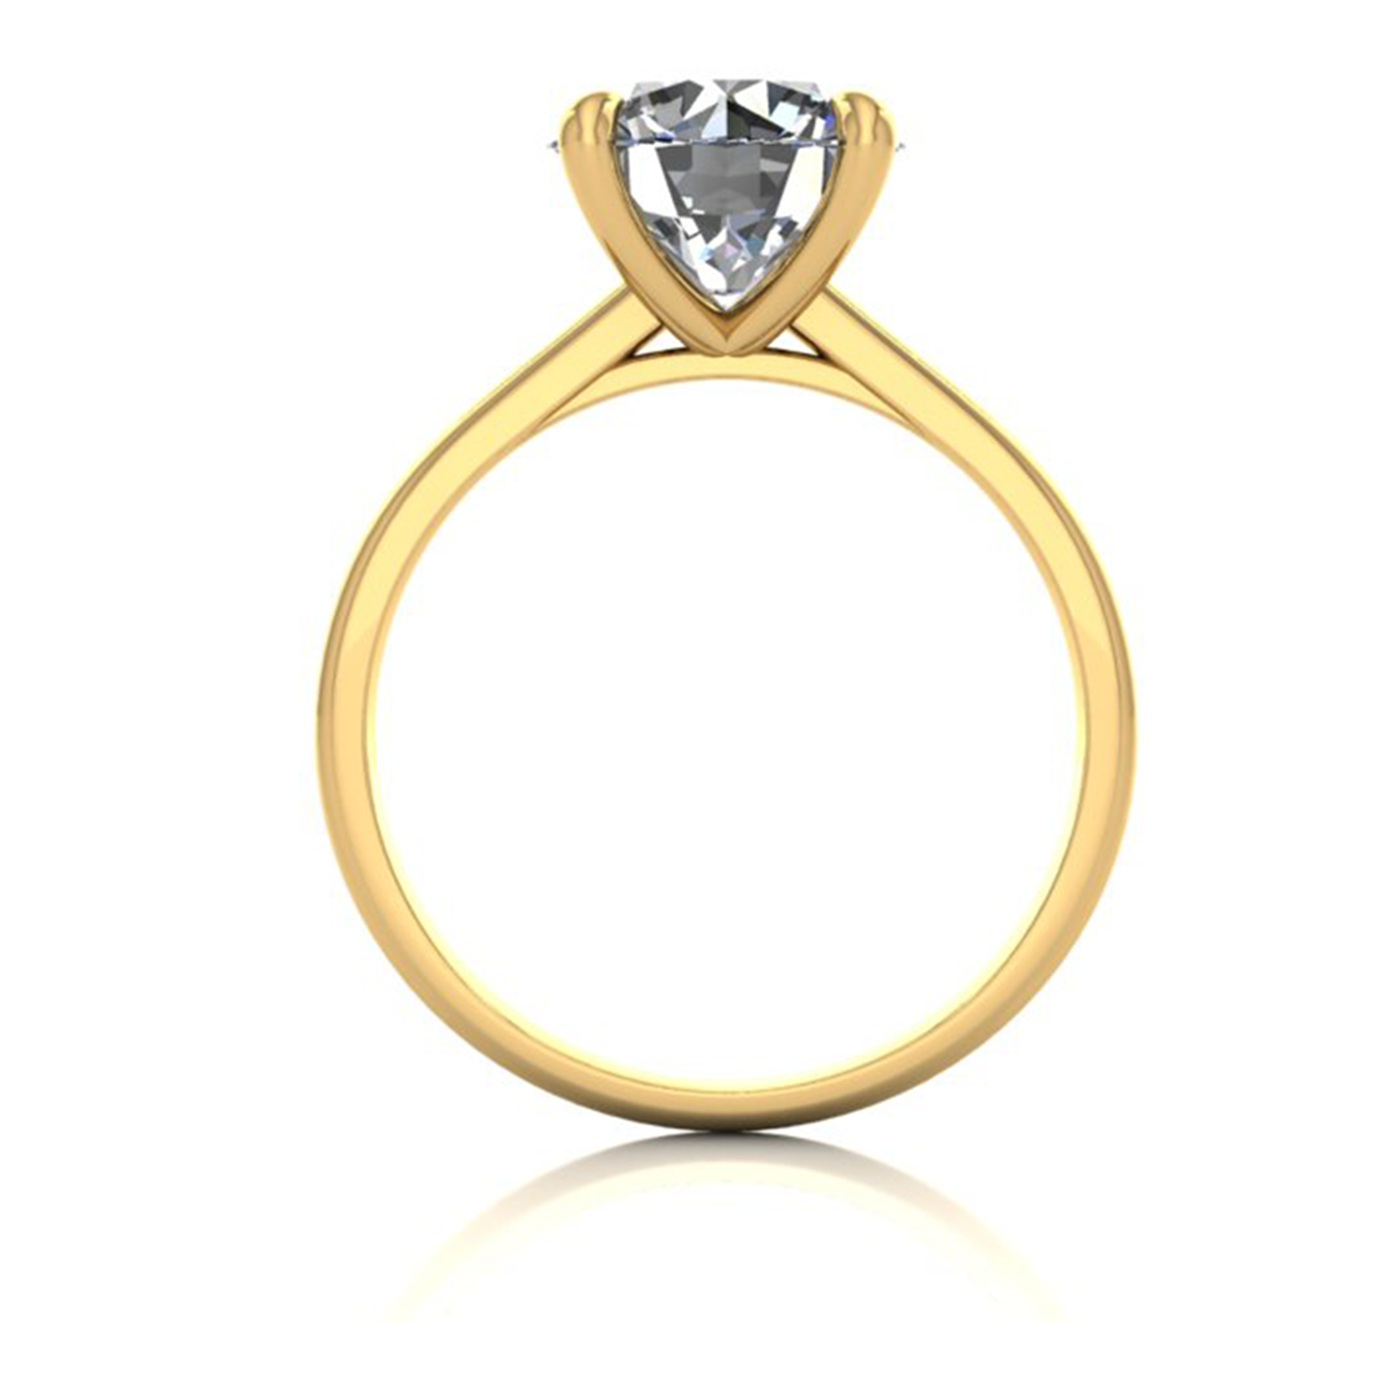 18k yellow gold 2,50 ct 4 prongs solitaire round cut diamond engagement ring with whisper thin band